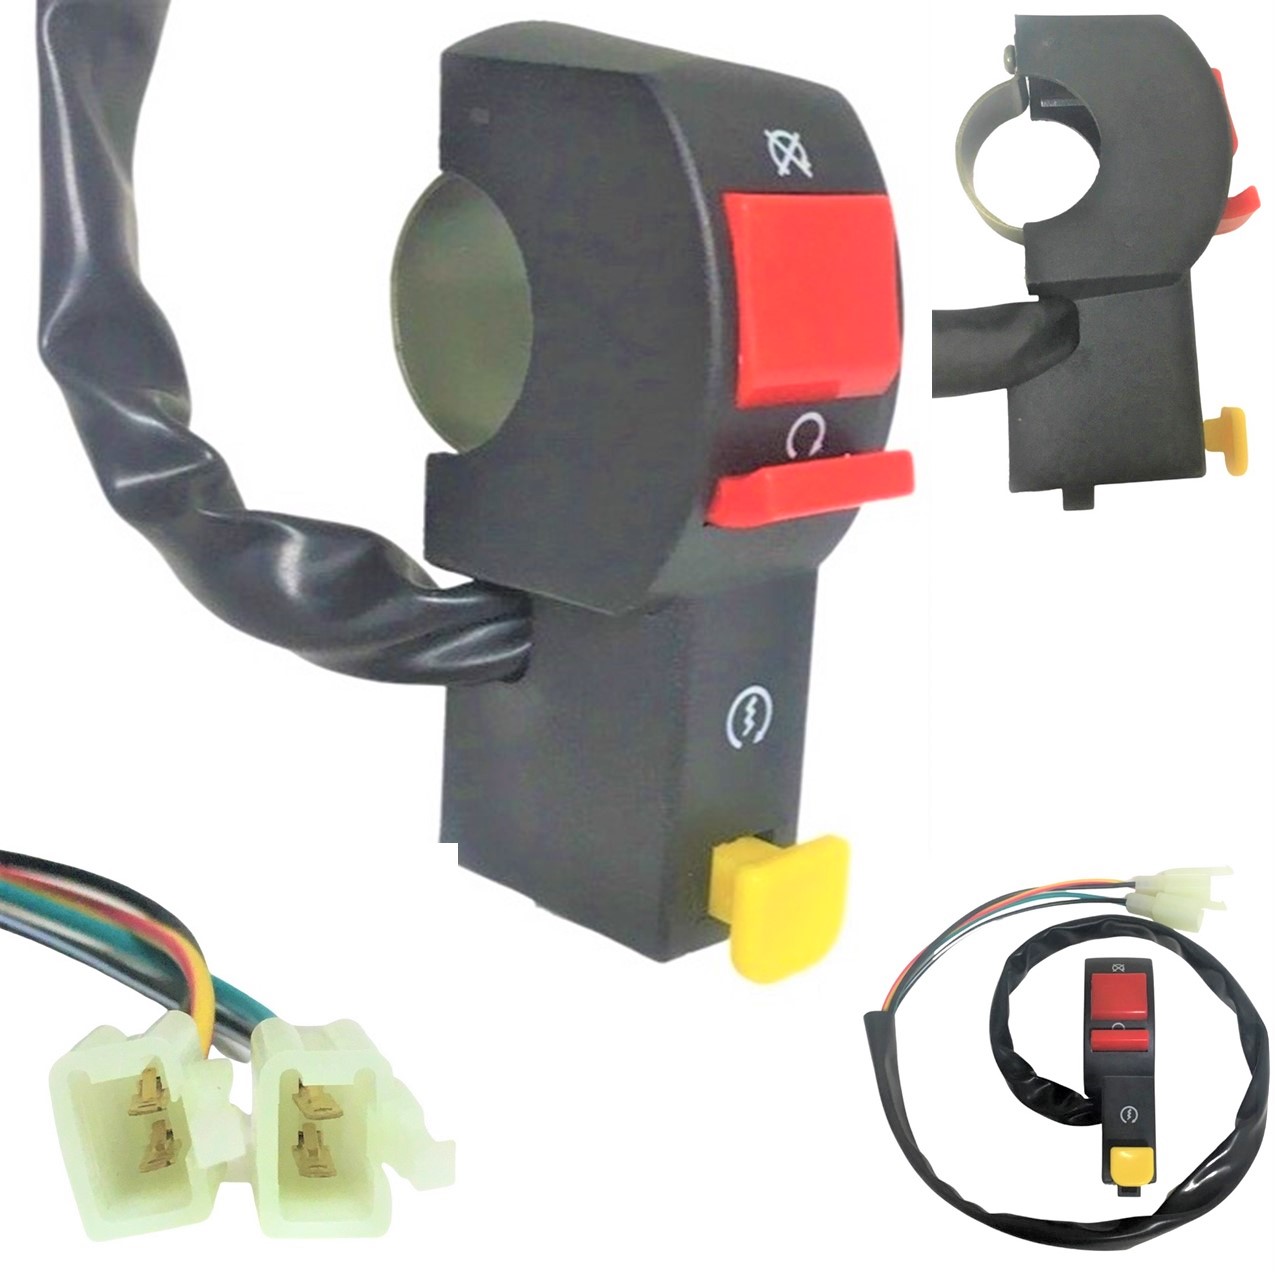 Kill Switch with Electric Start Button 2 Wire Female Jack + 2 Wire Female Jack. Fits Many Dirt Bikes and ATV's